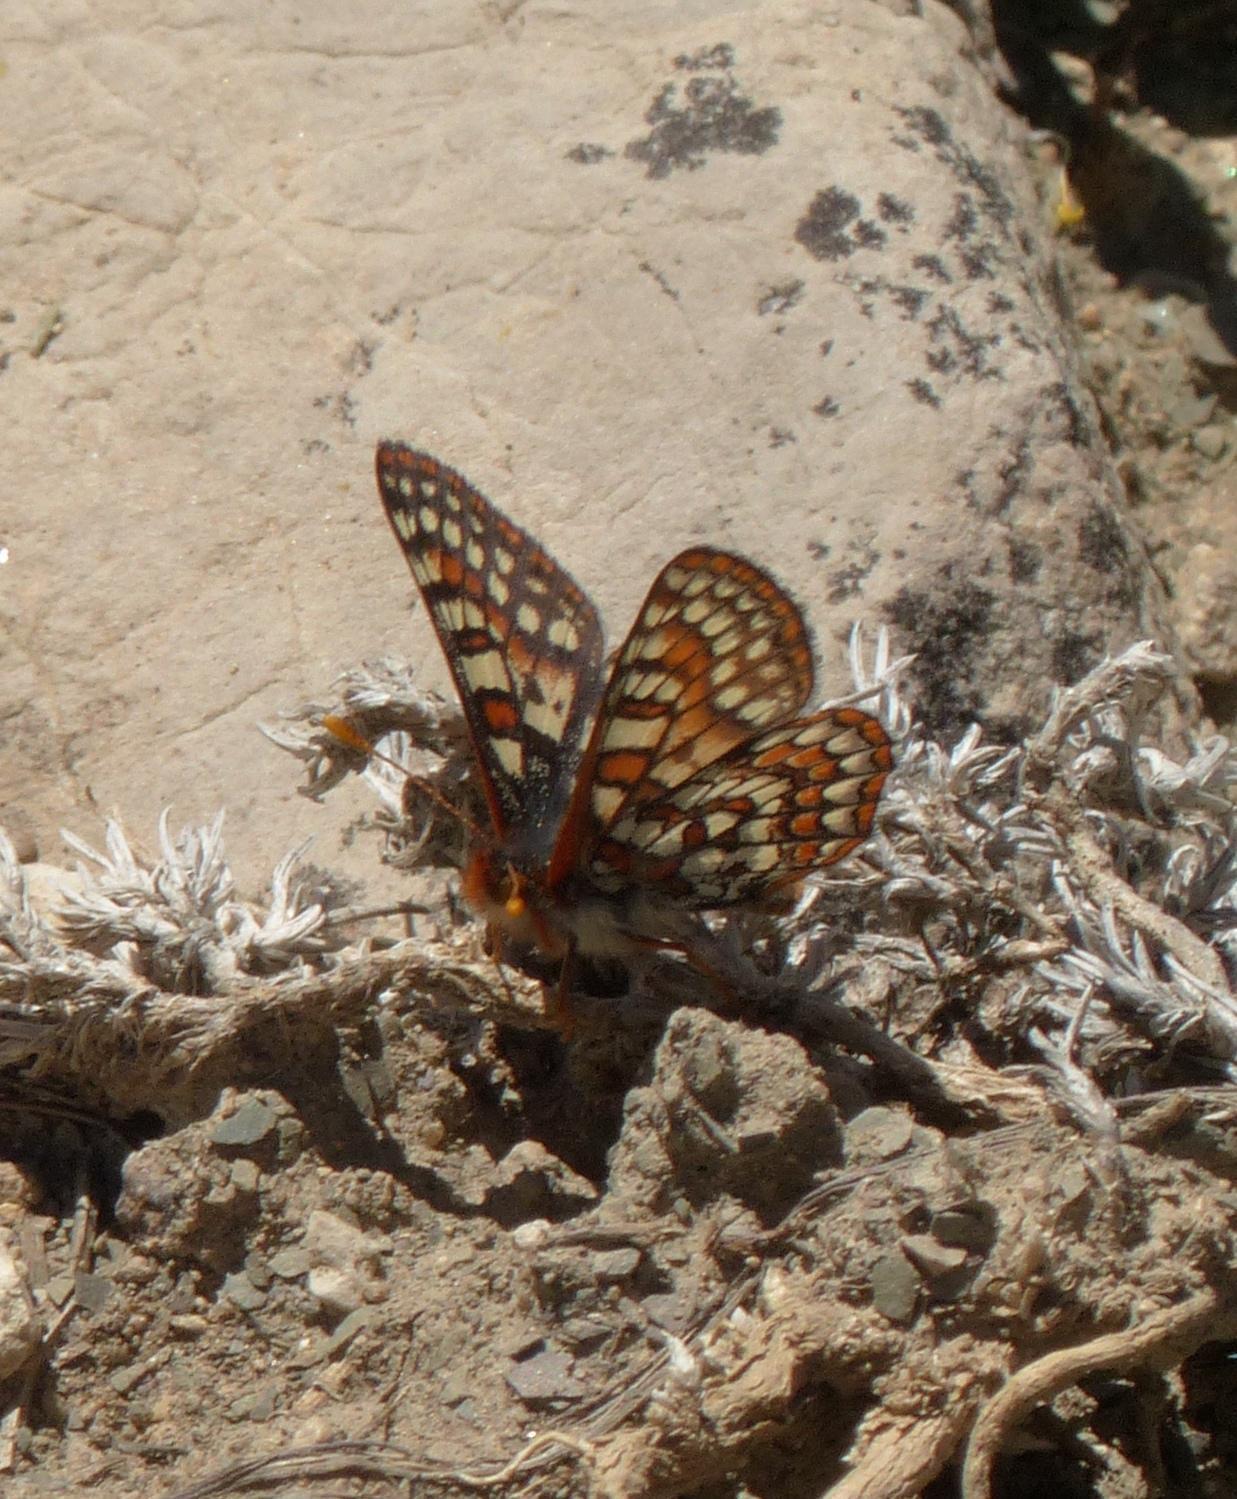 Edith's Checkerspot Photo by David Bell